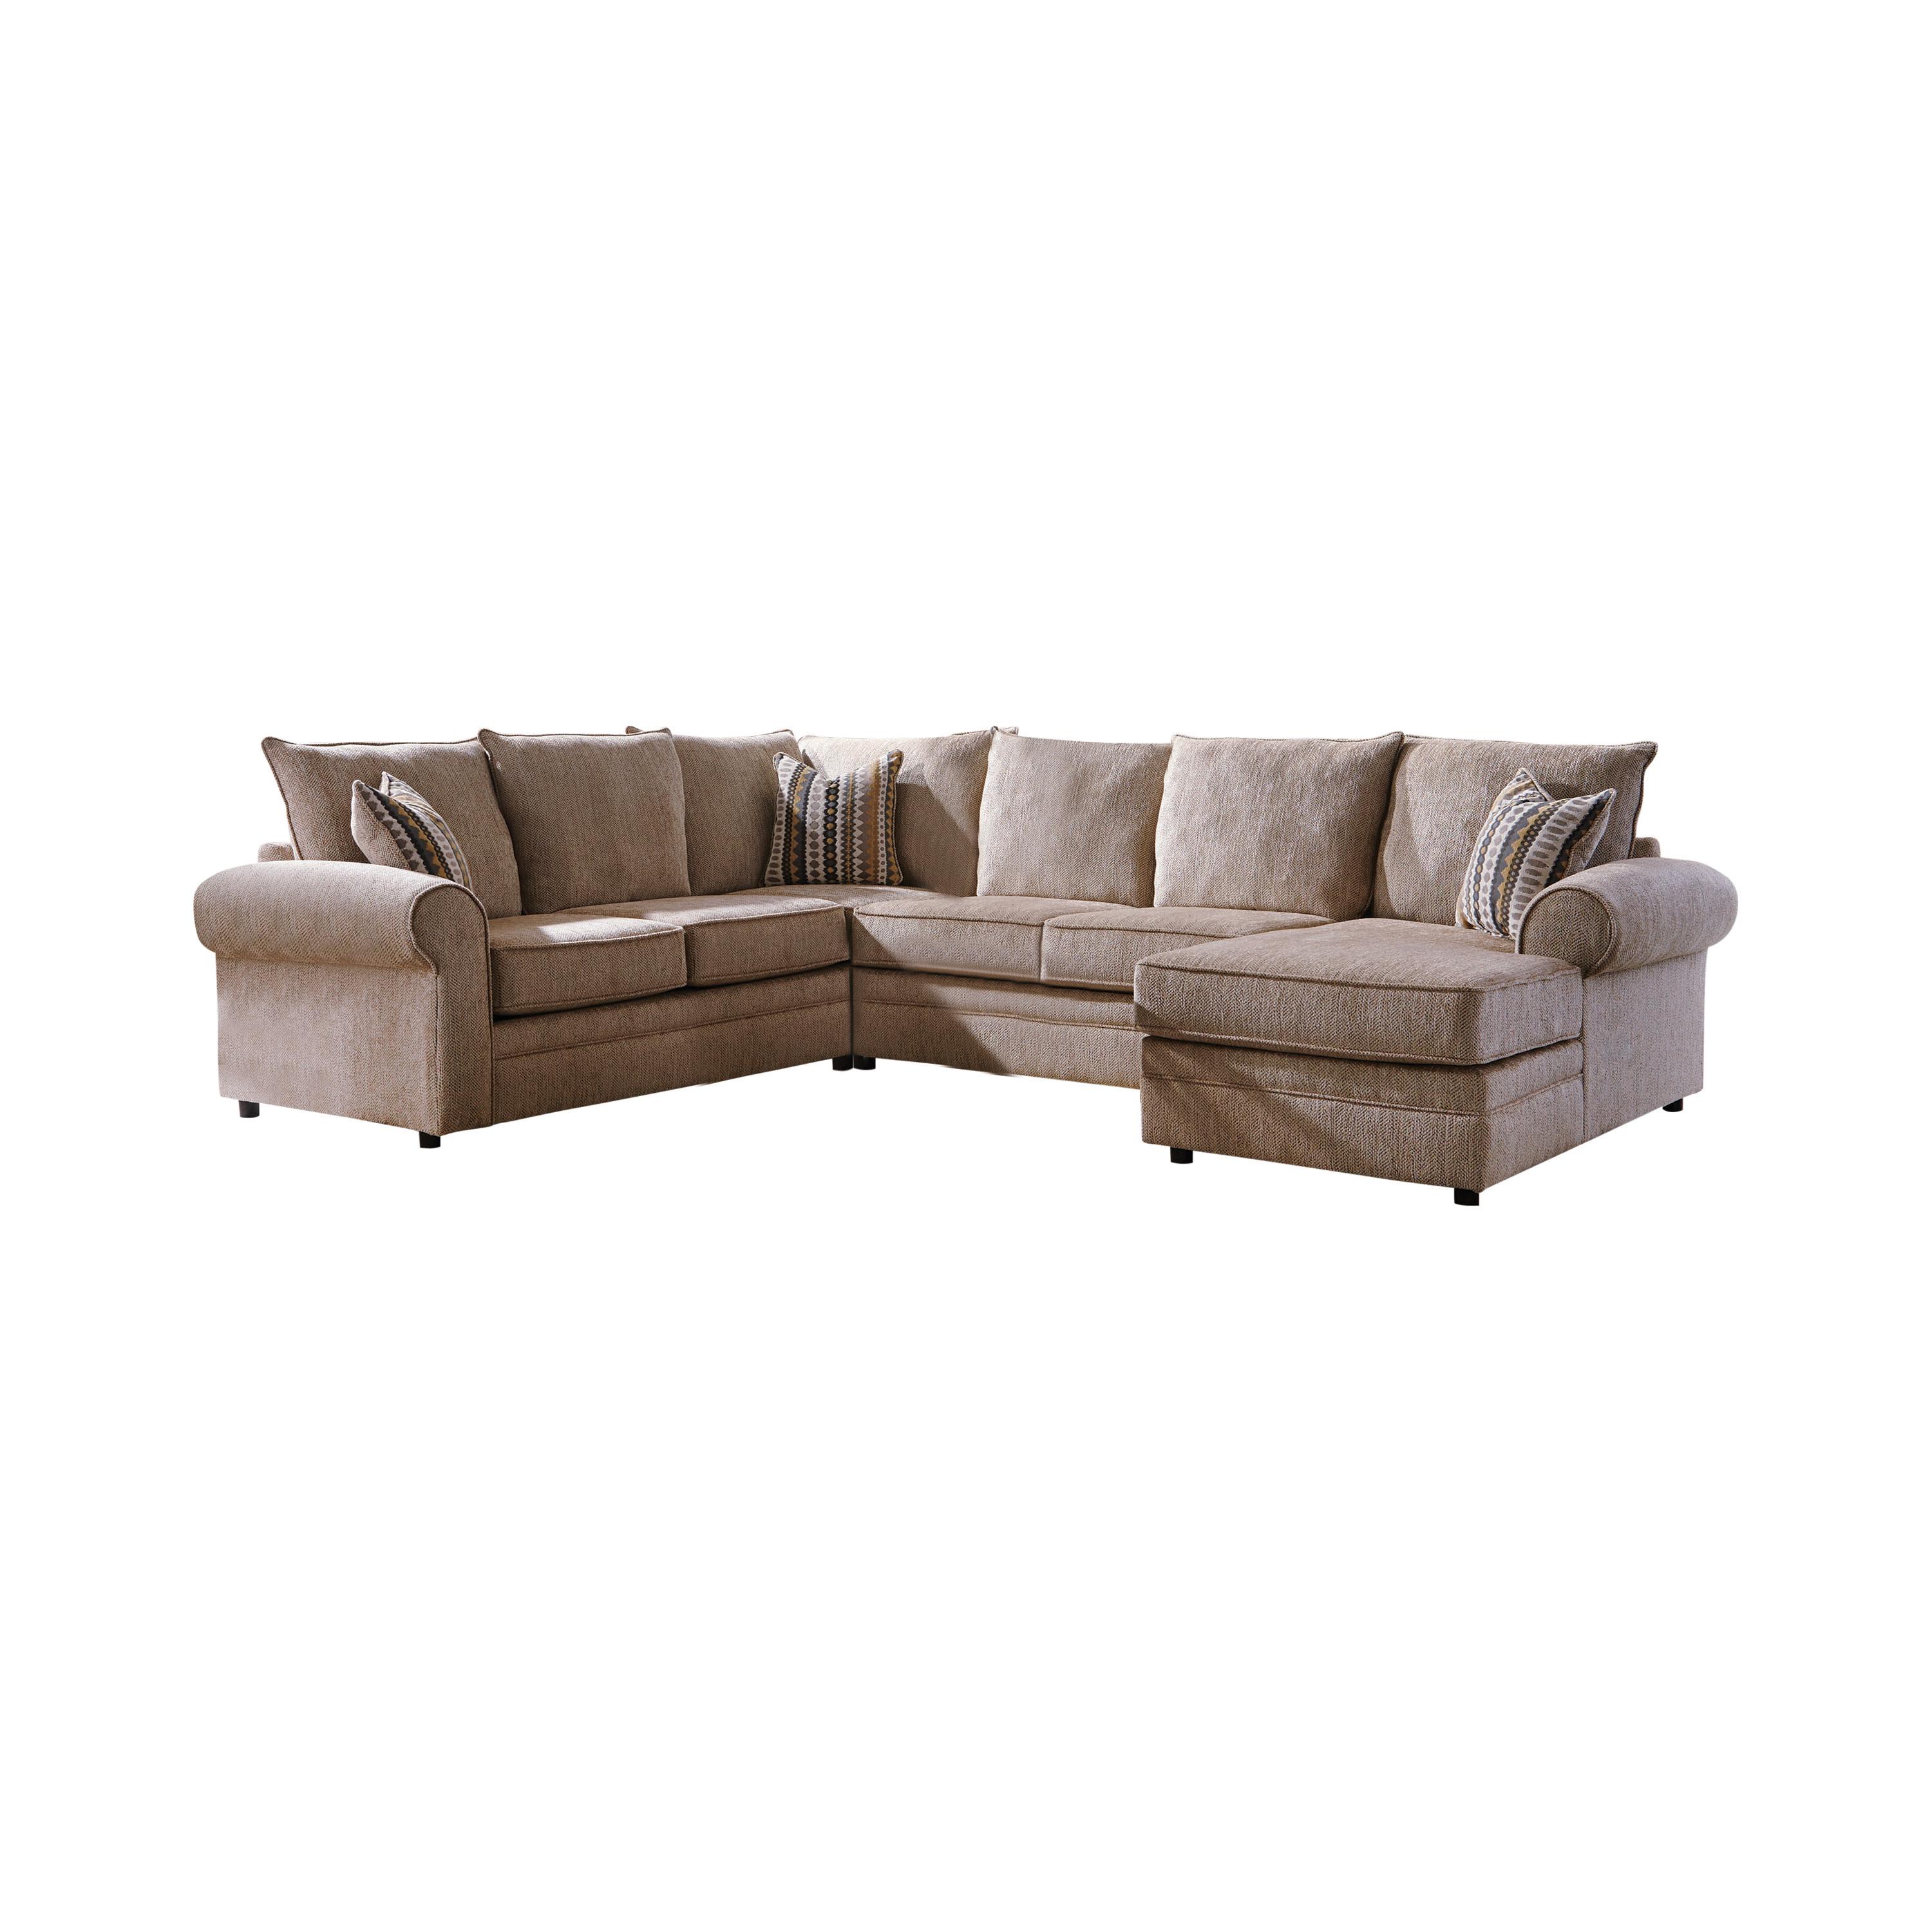 Transitional Sectional 501149 Fairhaven 501149 in Brown Chenille